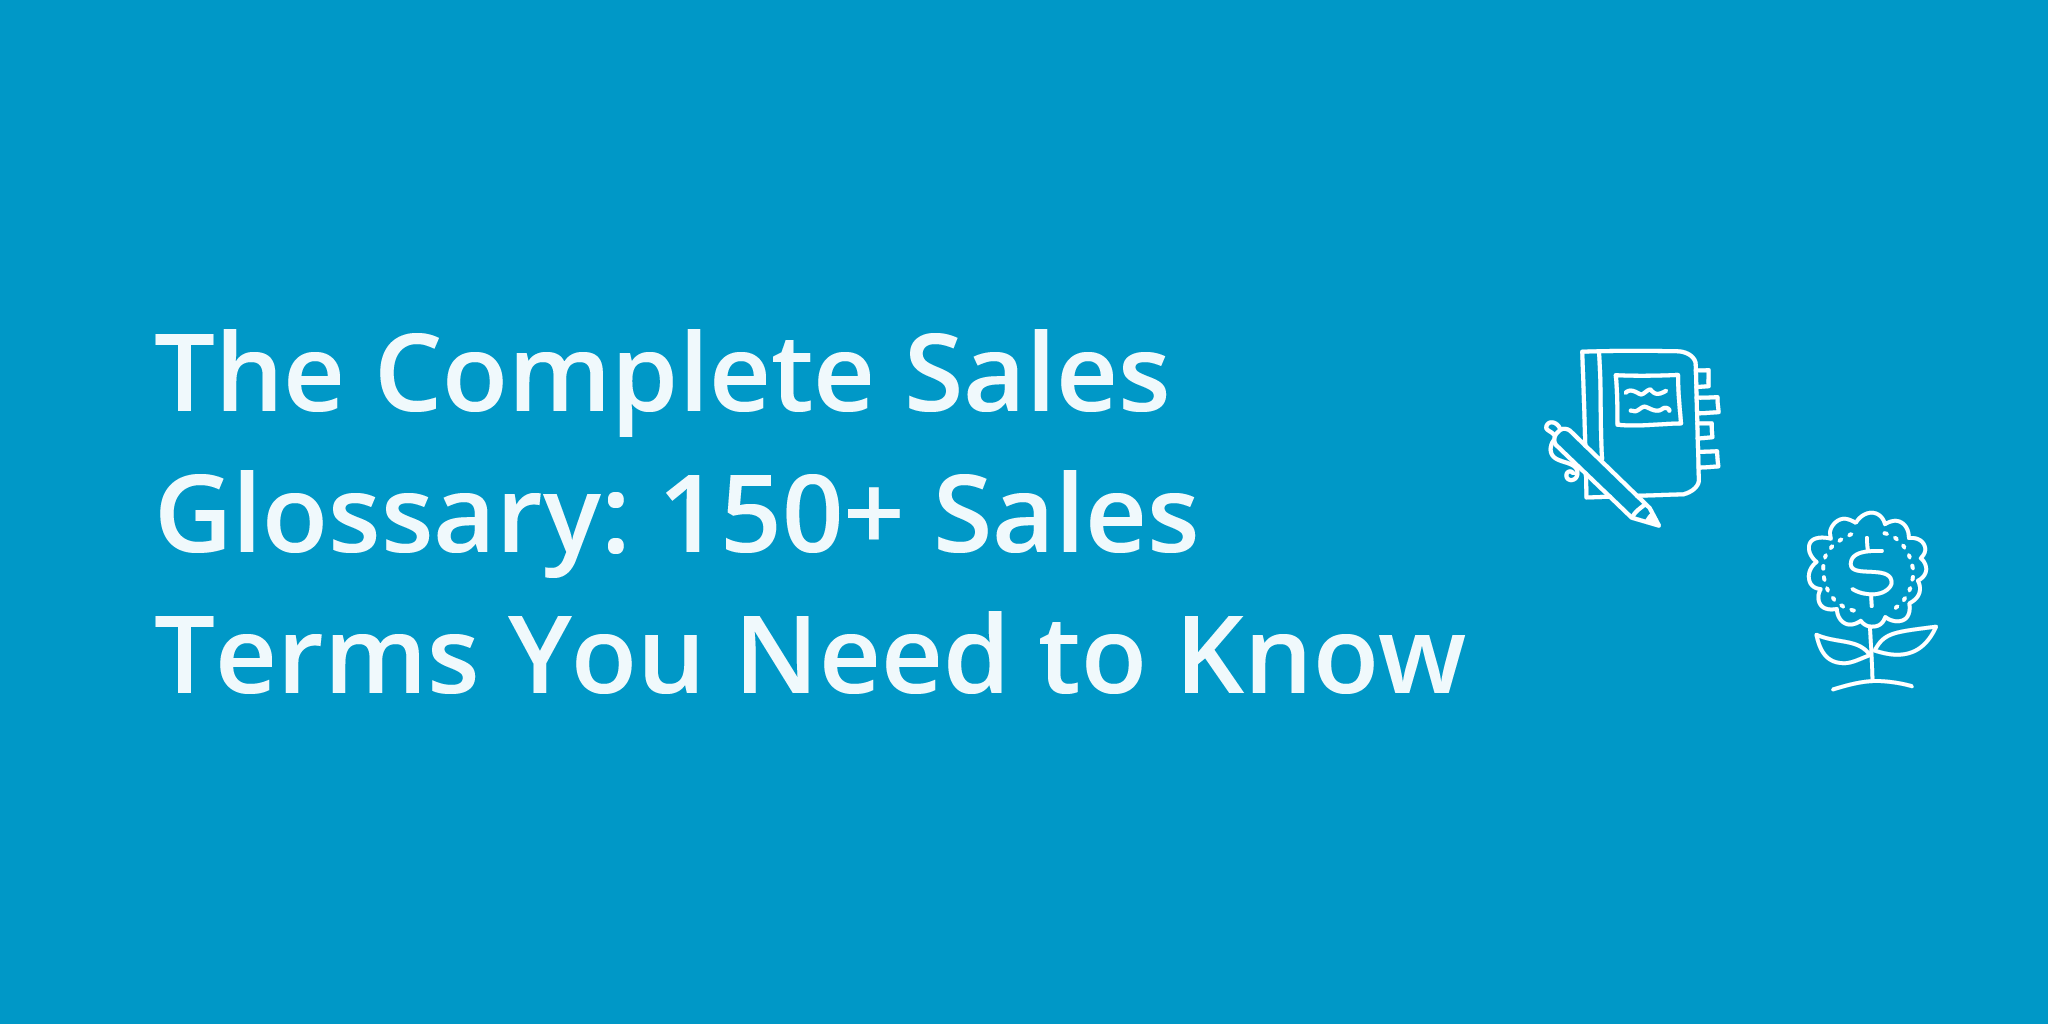 The Complete Sales Glossary: 150+ Sales and Marketing Terms You Need to Know | Telephones for business